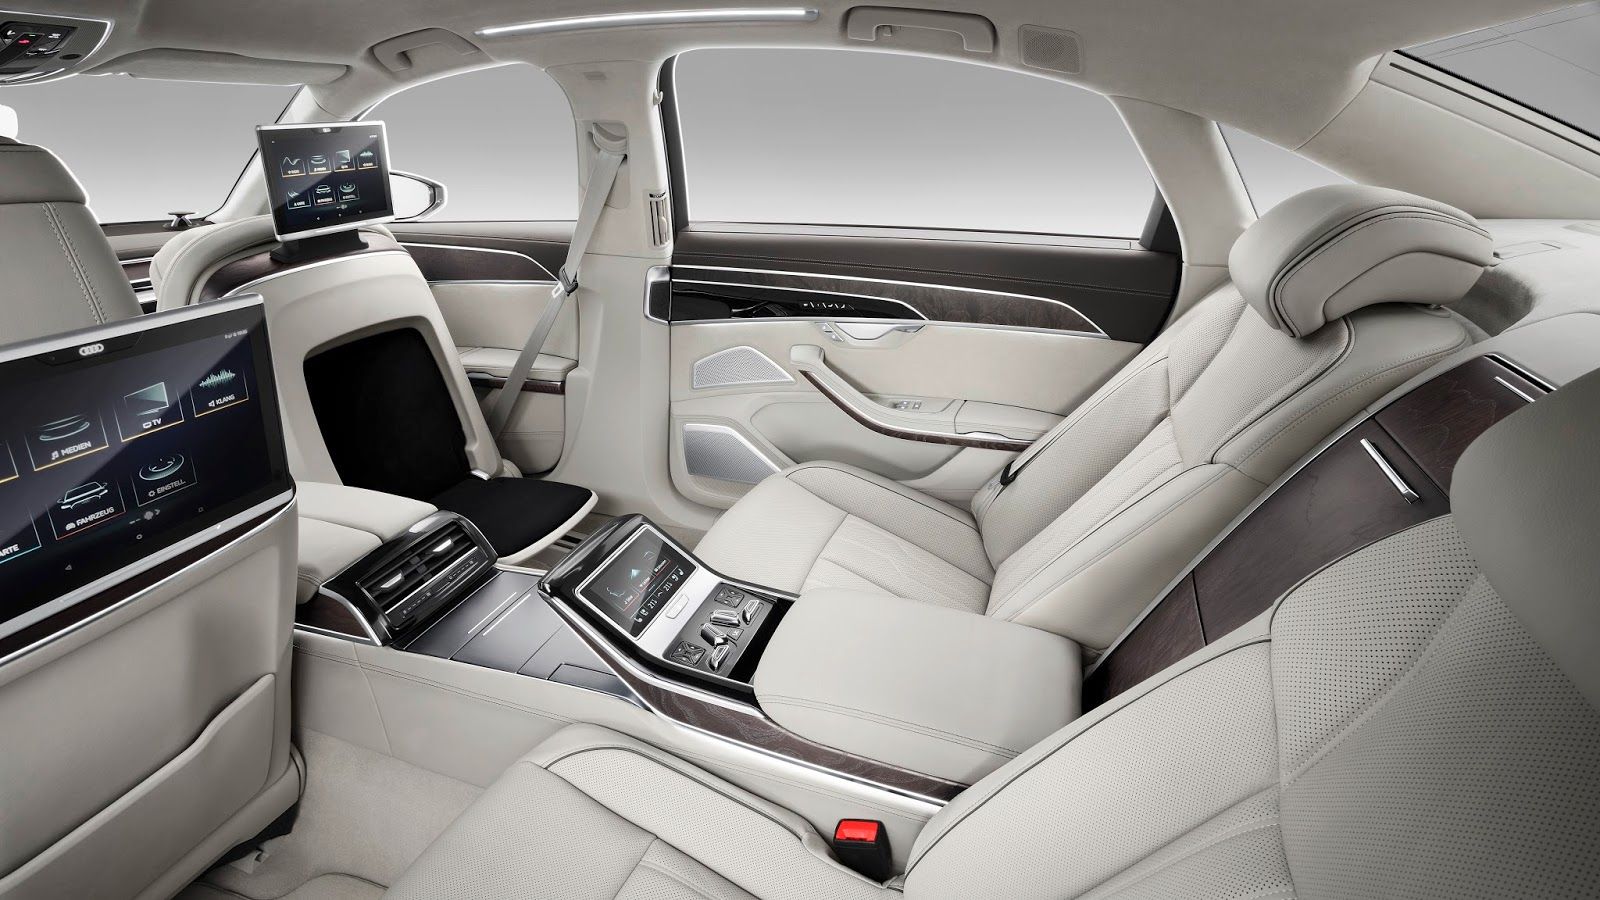 back seats of modern luxury car, red leather interior